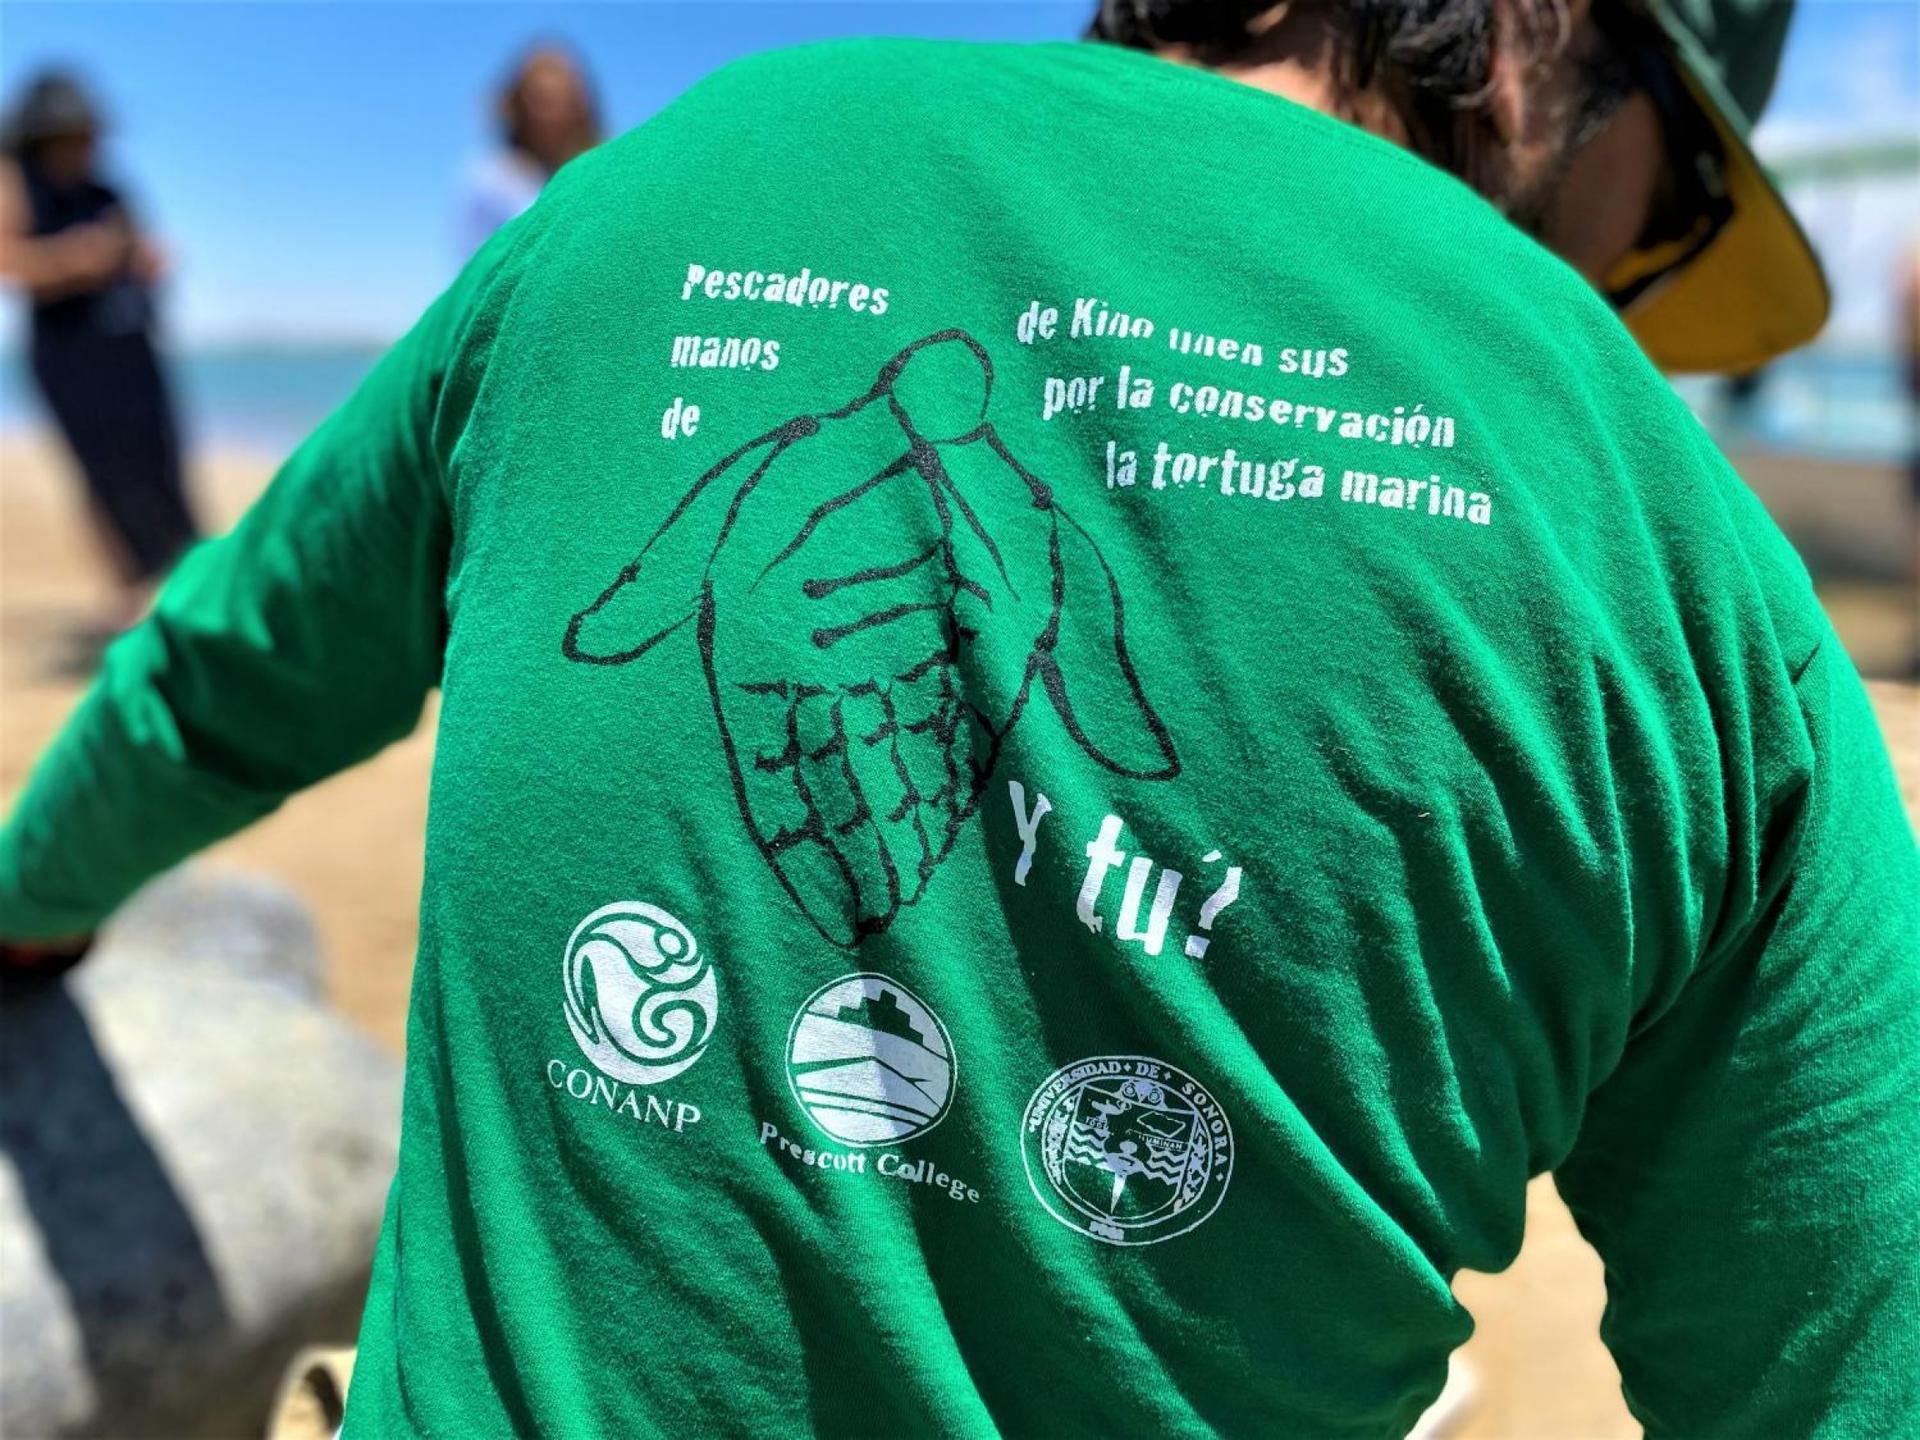 Cosme Becerra, like all of the Kino Bay tortugueros, wears a shirt that describes their conservation work.